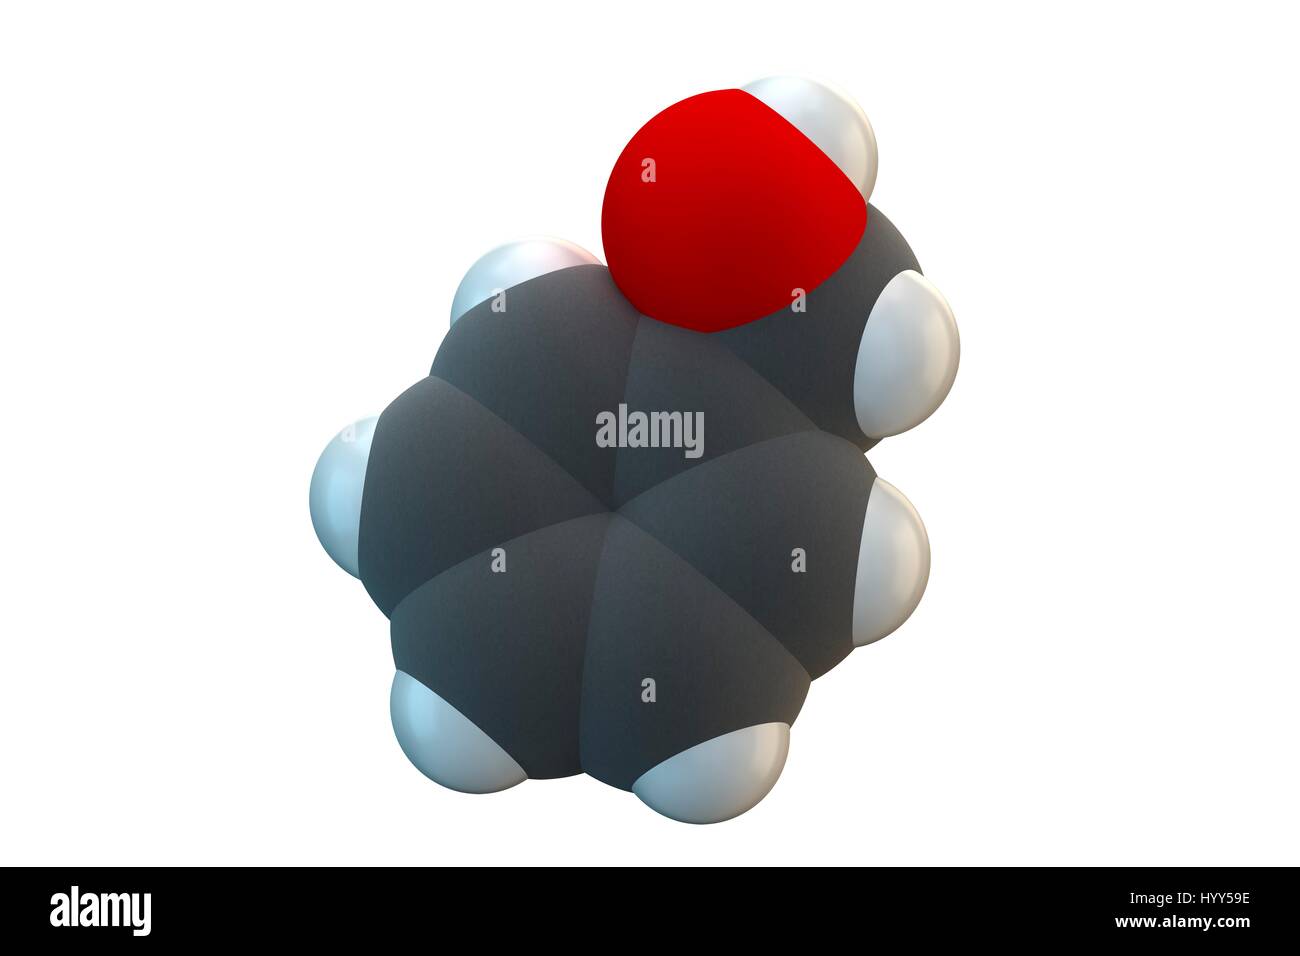 Benzyl alcohol solvent molecule. Used in manufacture of paint and ink, and as preservative in drugs. Chemical formula is C7H8O. Atoms are represented as spheres: carbon (grey), hydrogen (white), oxygen (red). Illustration. Stock Photo